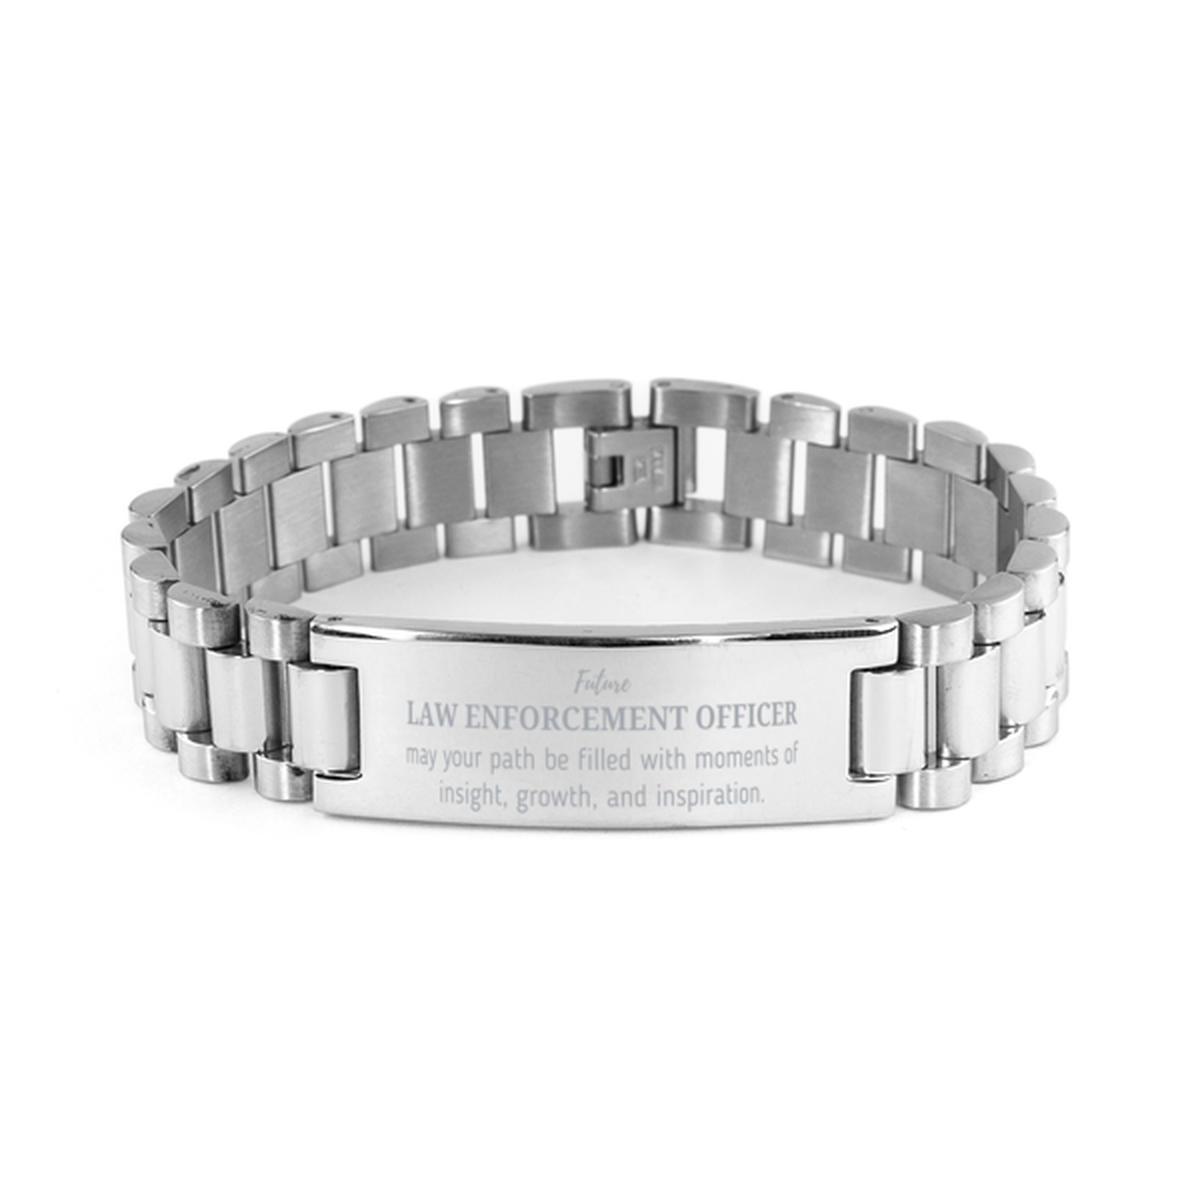 Future Law Enforcement Officer Gifts, May your path be filled with moments of insight, Graduation Gifts for New Law Enforcement Officer, Christmas Unique Ladder Stainless Steel Bracelet For Men, Women, Friends